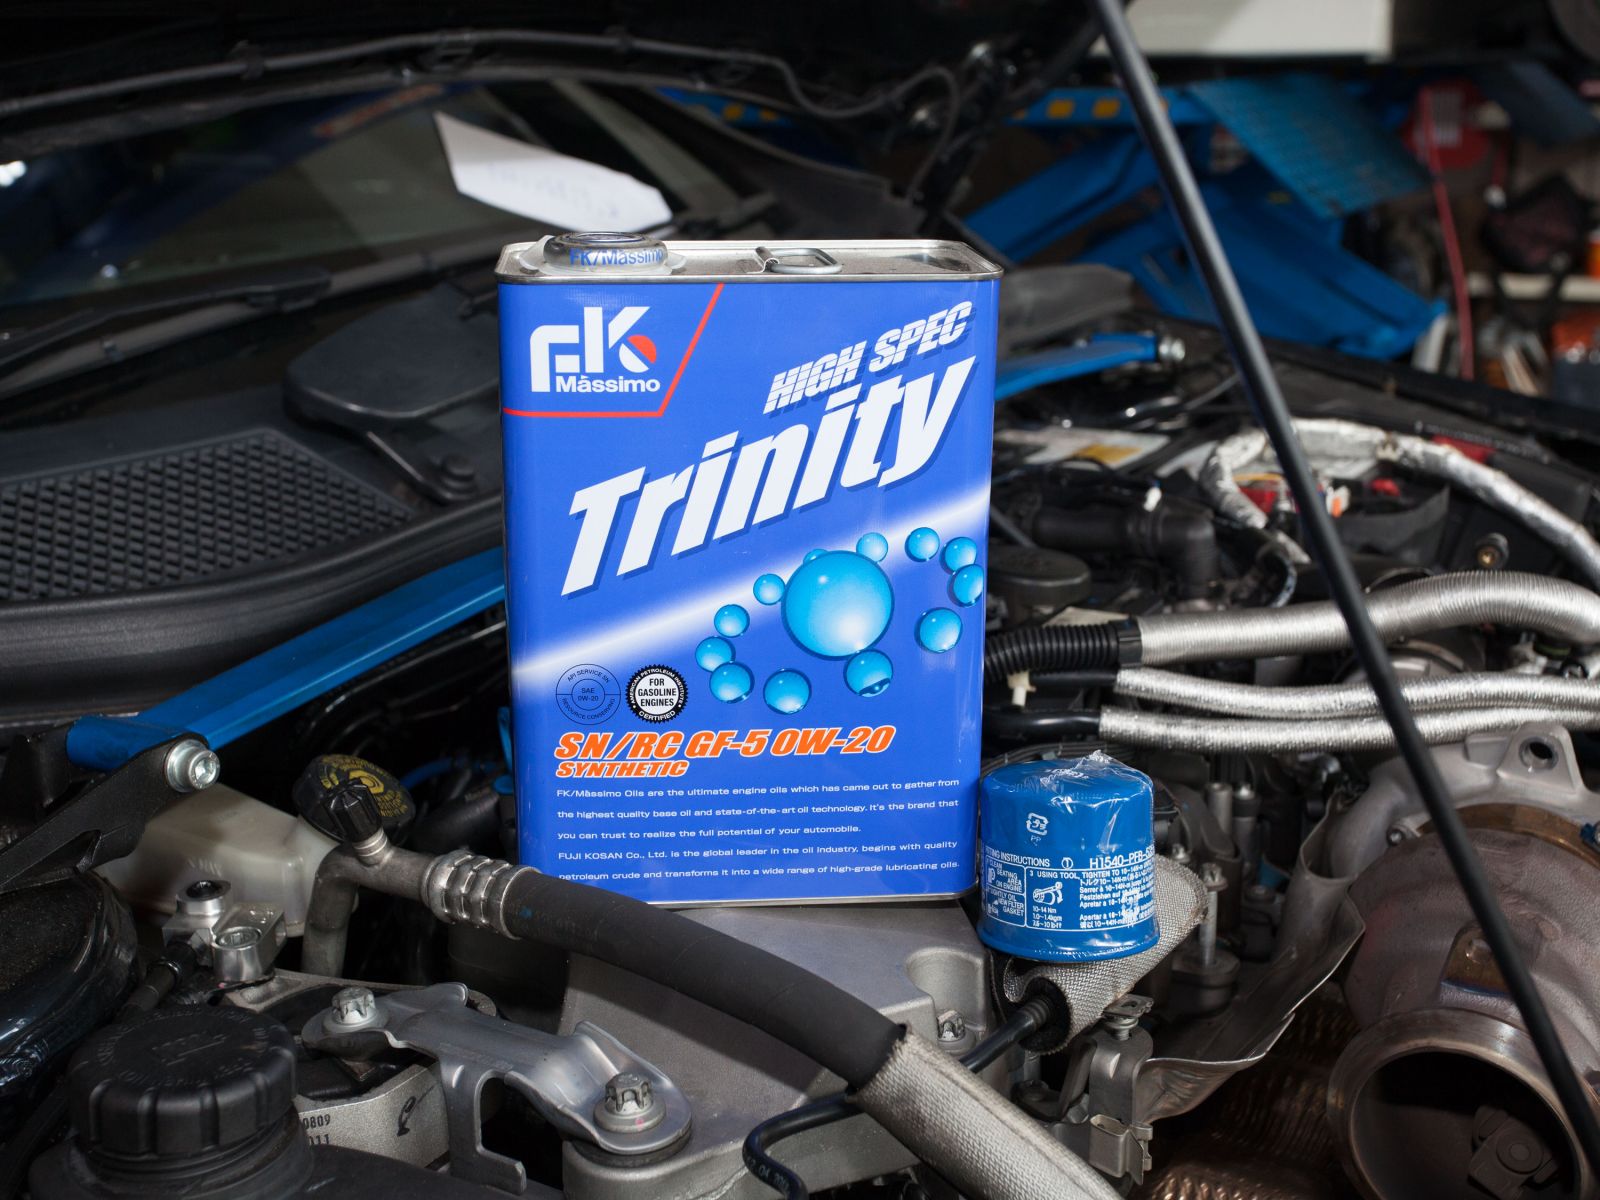 FK Massimo High Spec Trinity Fully 0W20 Vehicle Servicing (Continental Car Make)